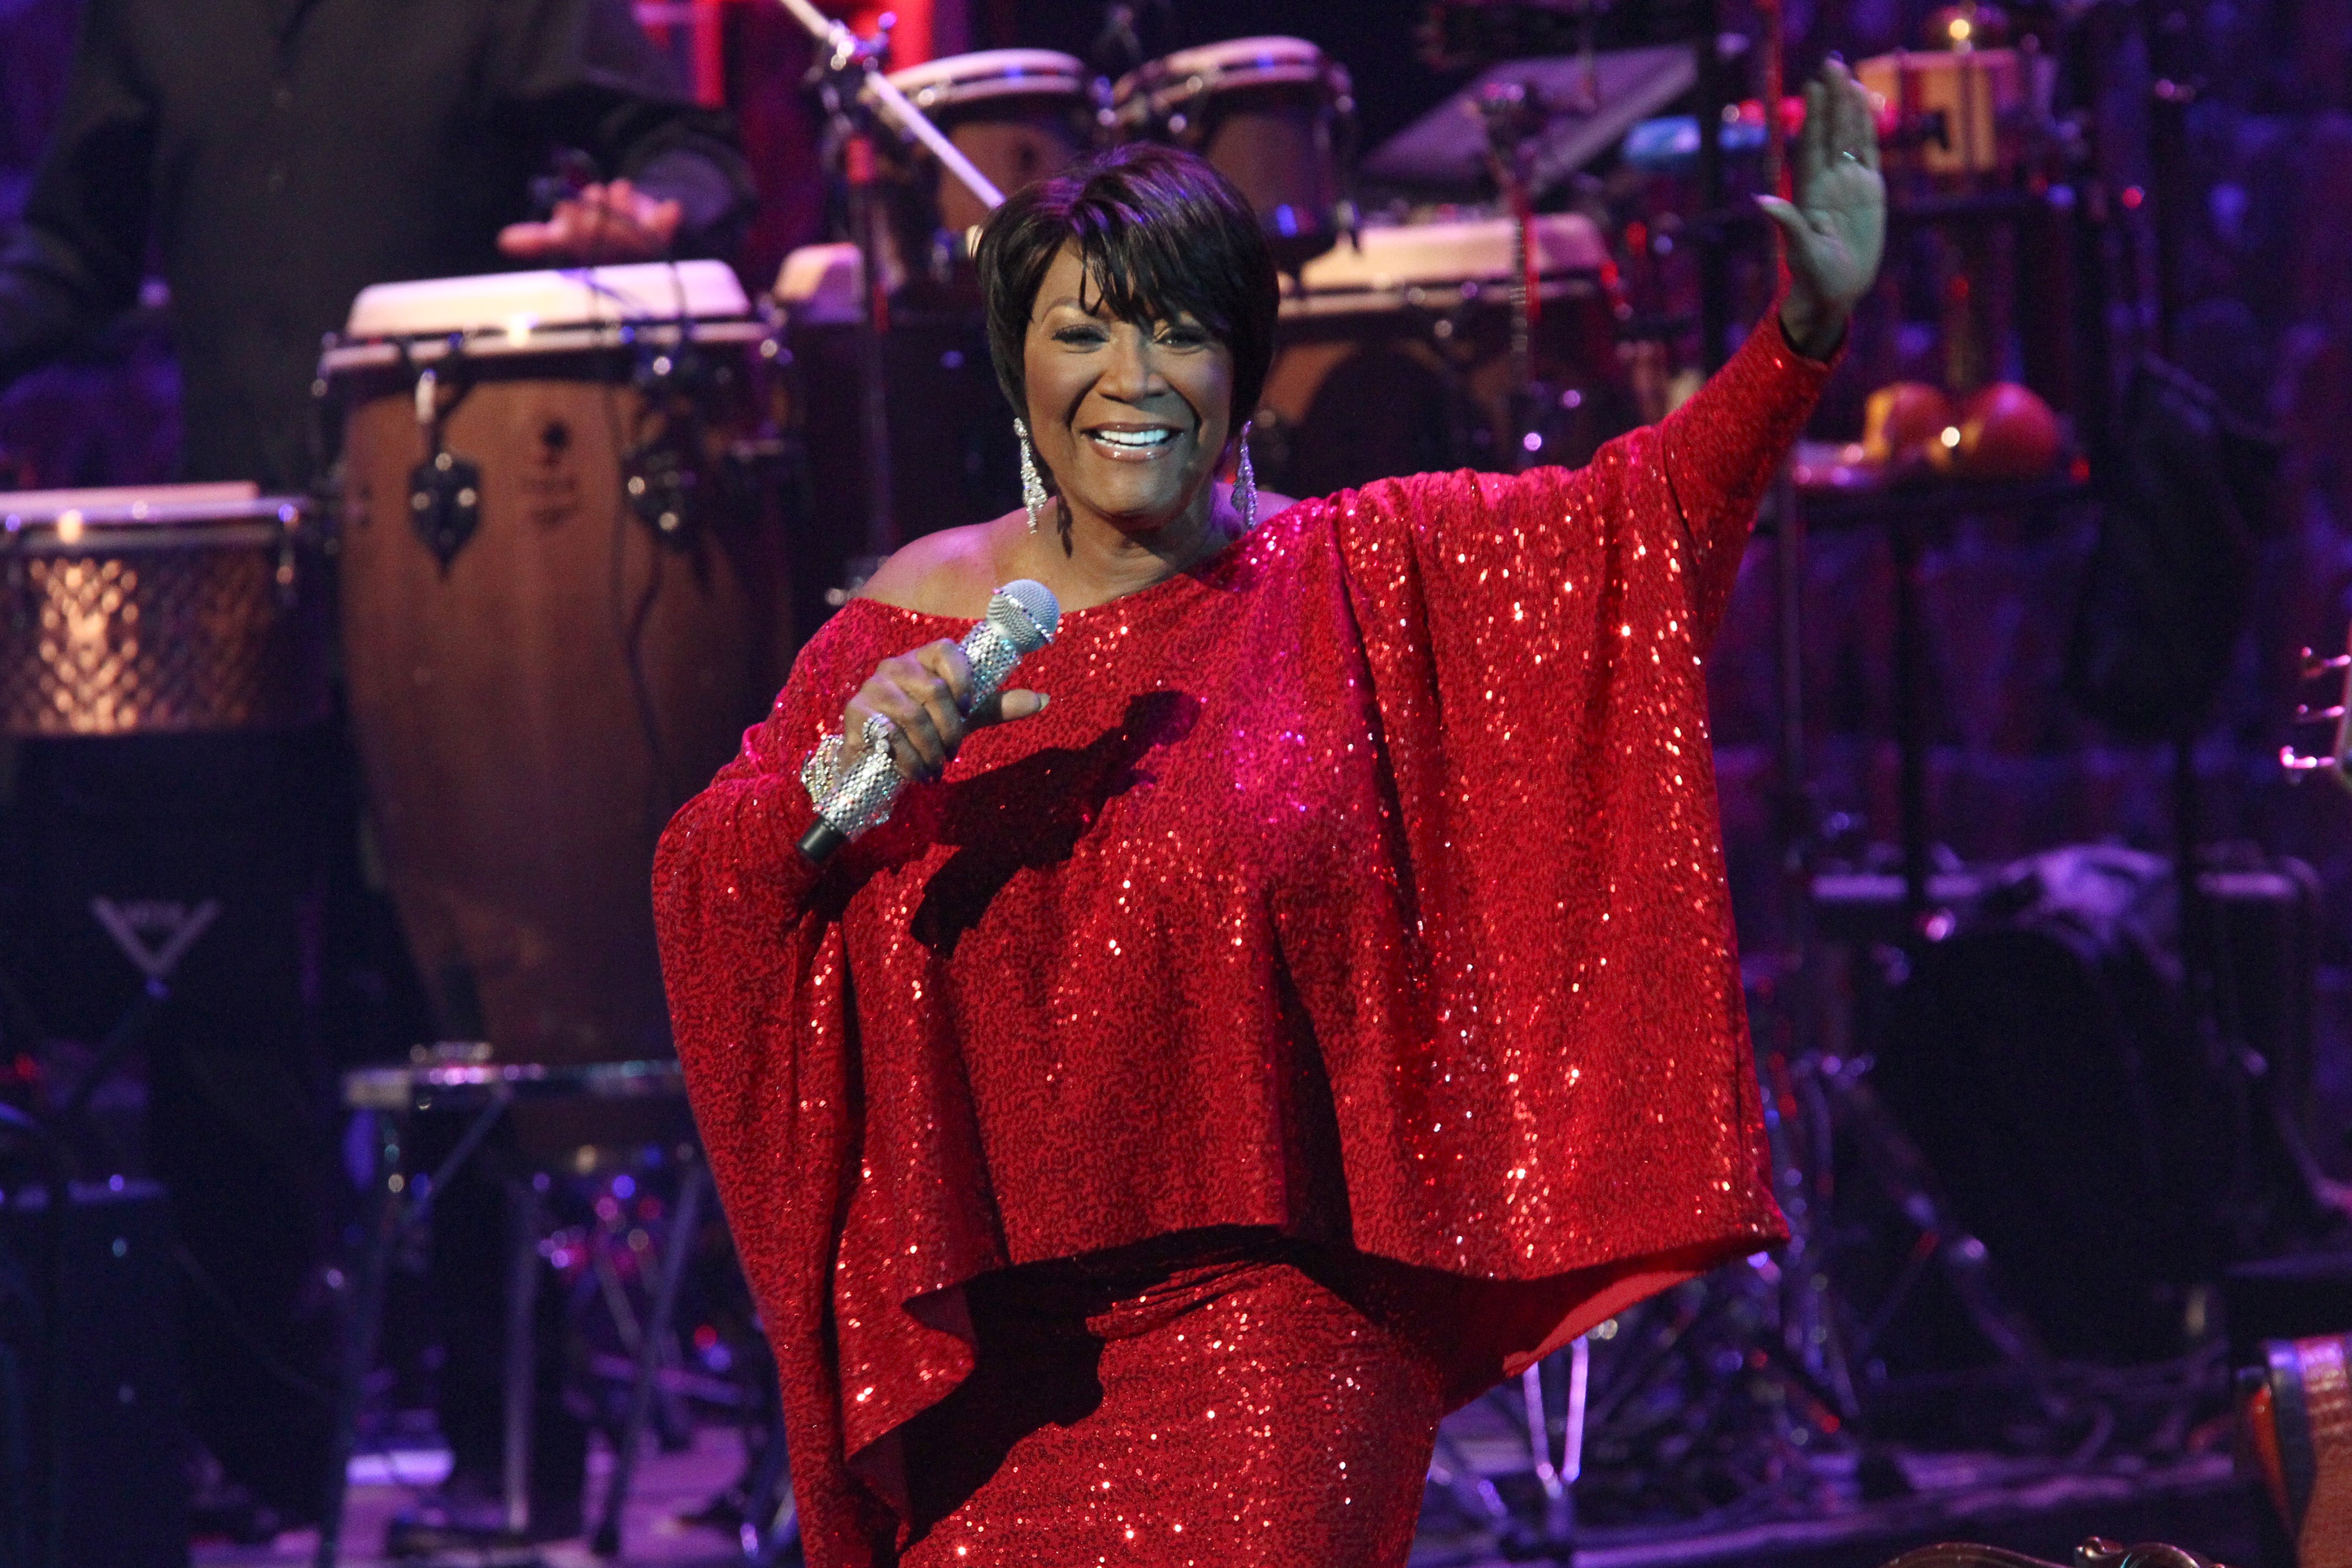 EXCLUSIVE: Patti LaBelle Gives Us The Scoop On Her New Banana Pudding
